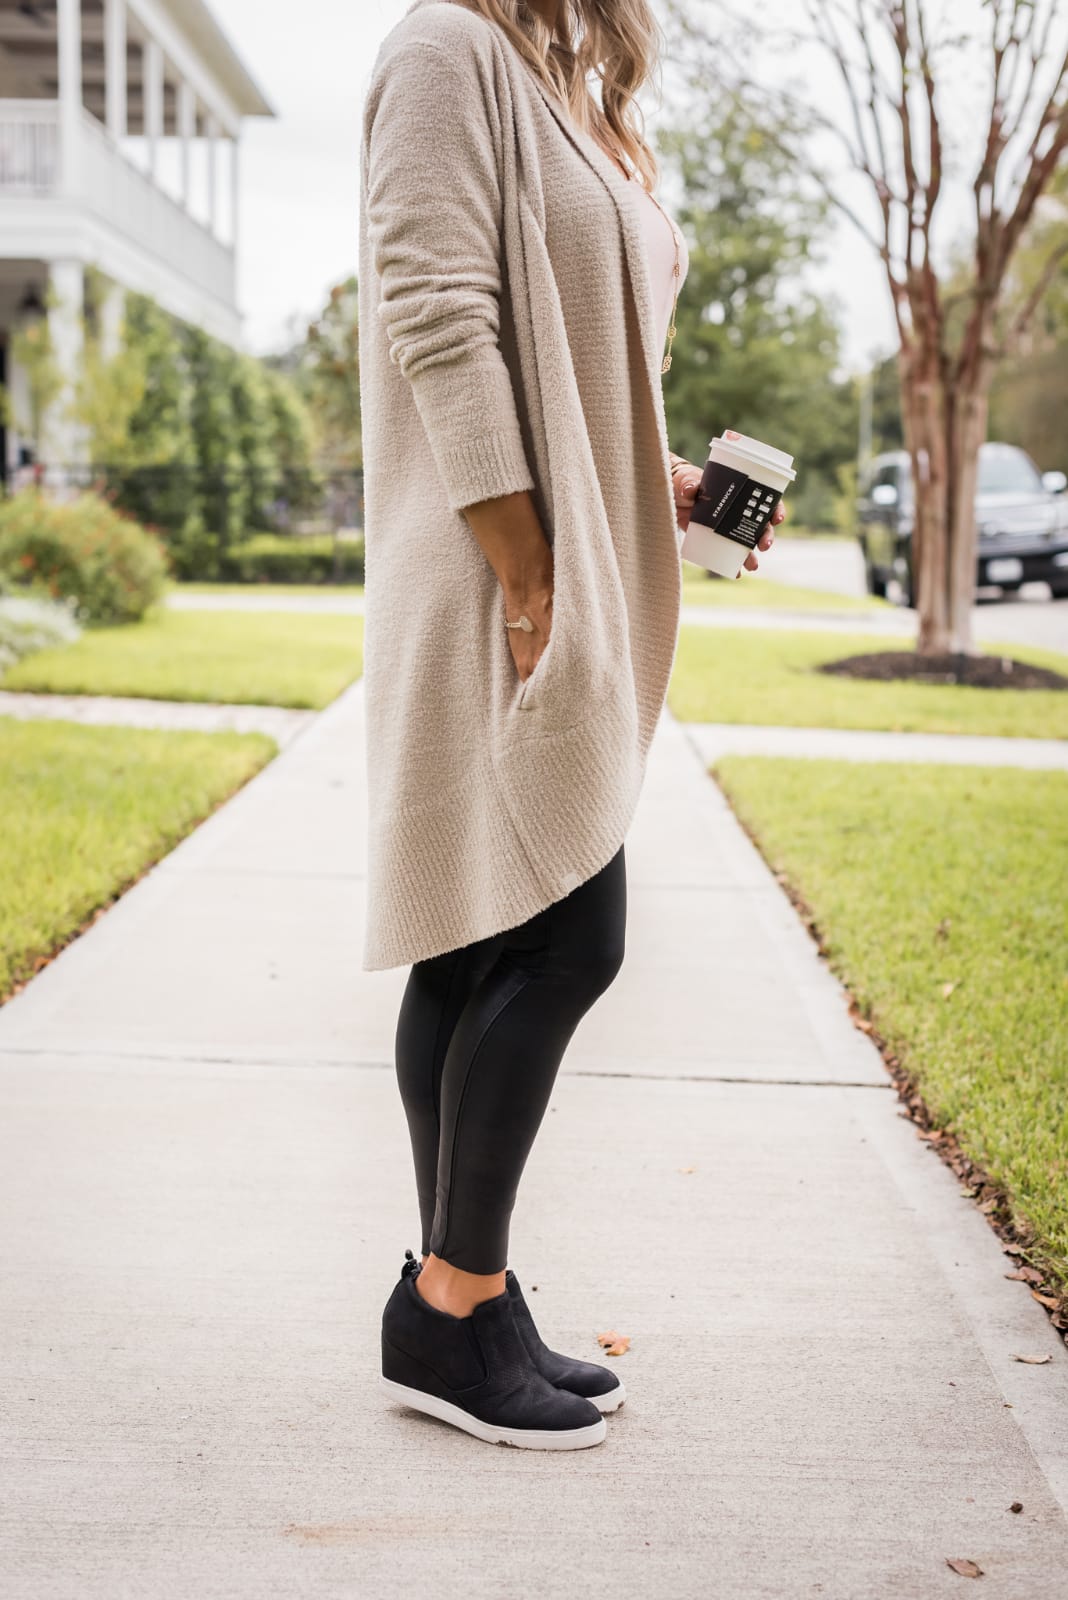 https://eb2pgoq5kpf.exactdn.com/wp-content/uploads/2018/10/Cozy-Fall-Outfit-Inspiration-Barefoot-Dreams-cardigan-and-Gibson-soft-tank-with-Spankx-leggings-and-sneakers-1.jpg?strip=all&lossy=1&resize=1068%2C1600&ssl=1